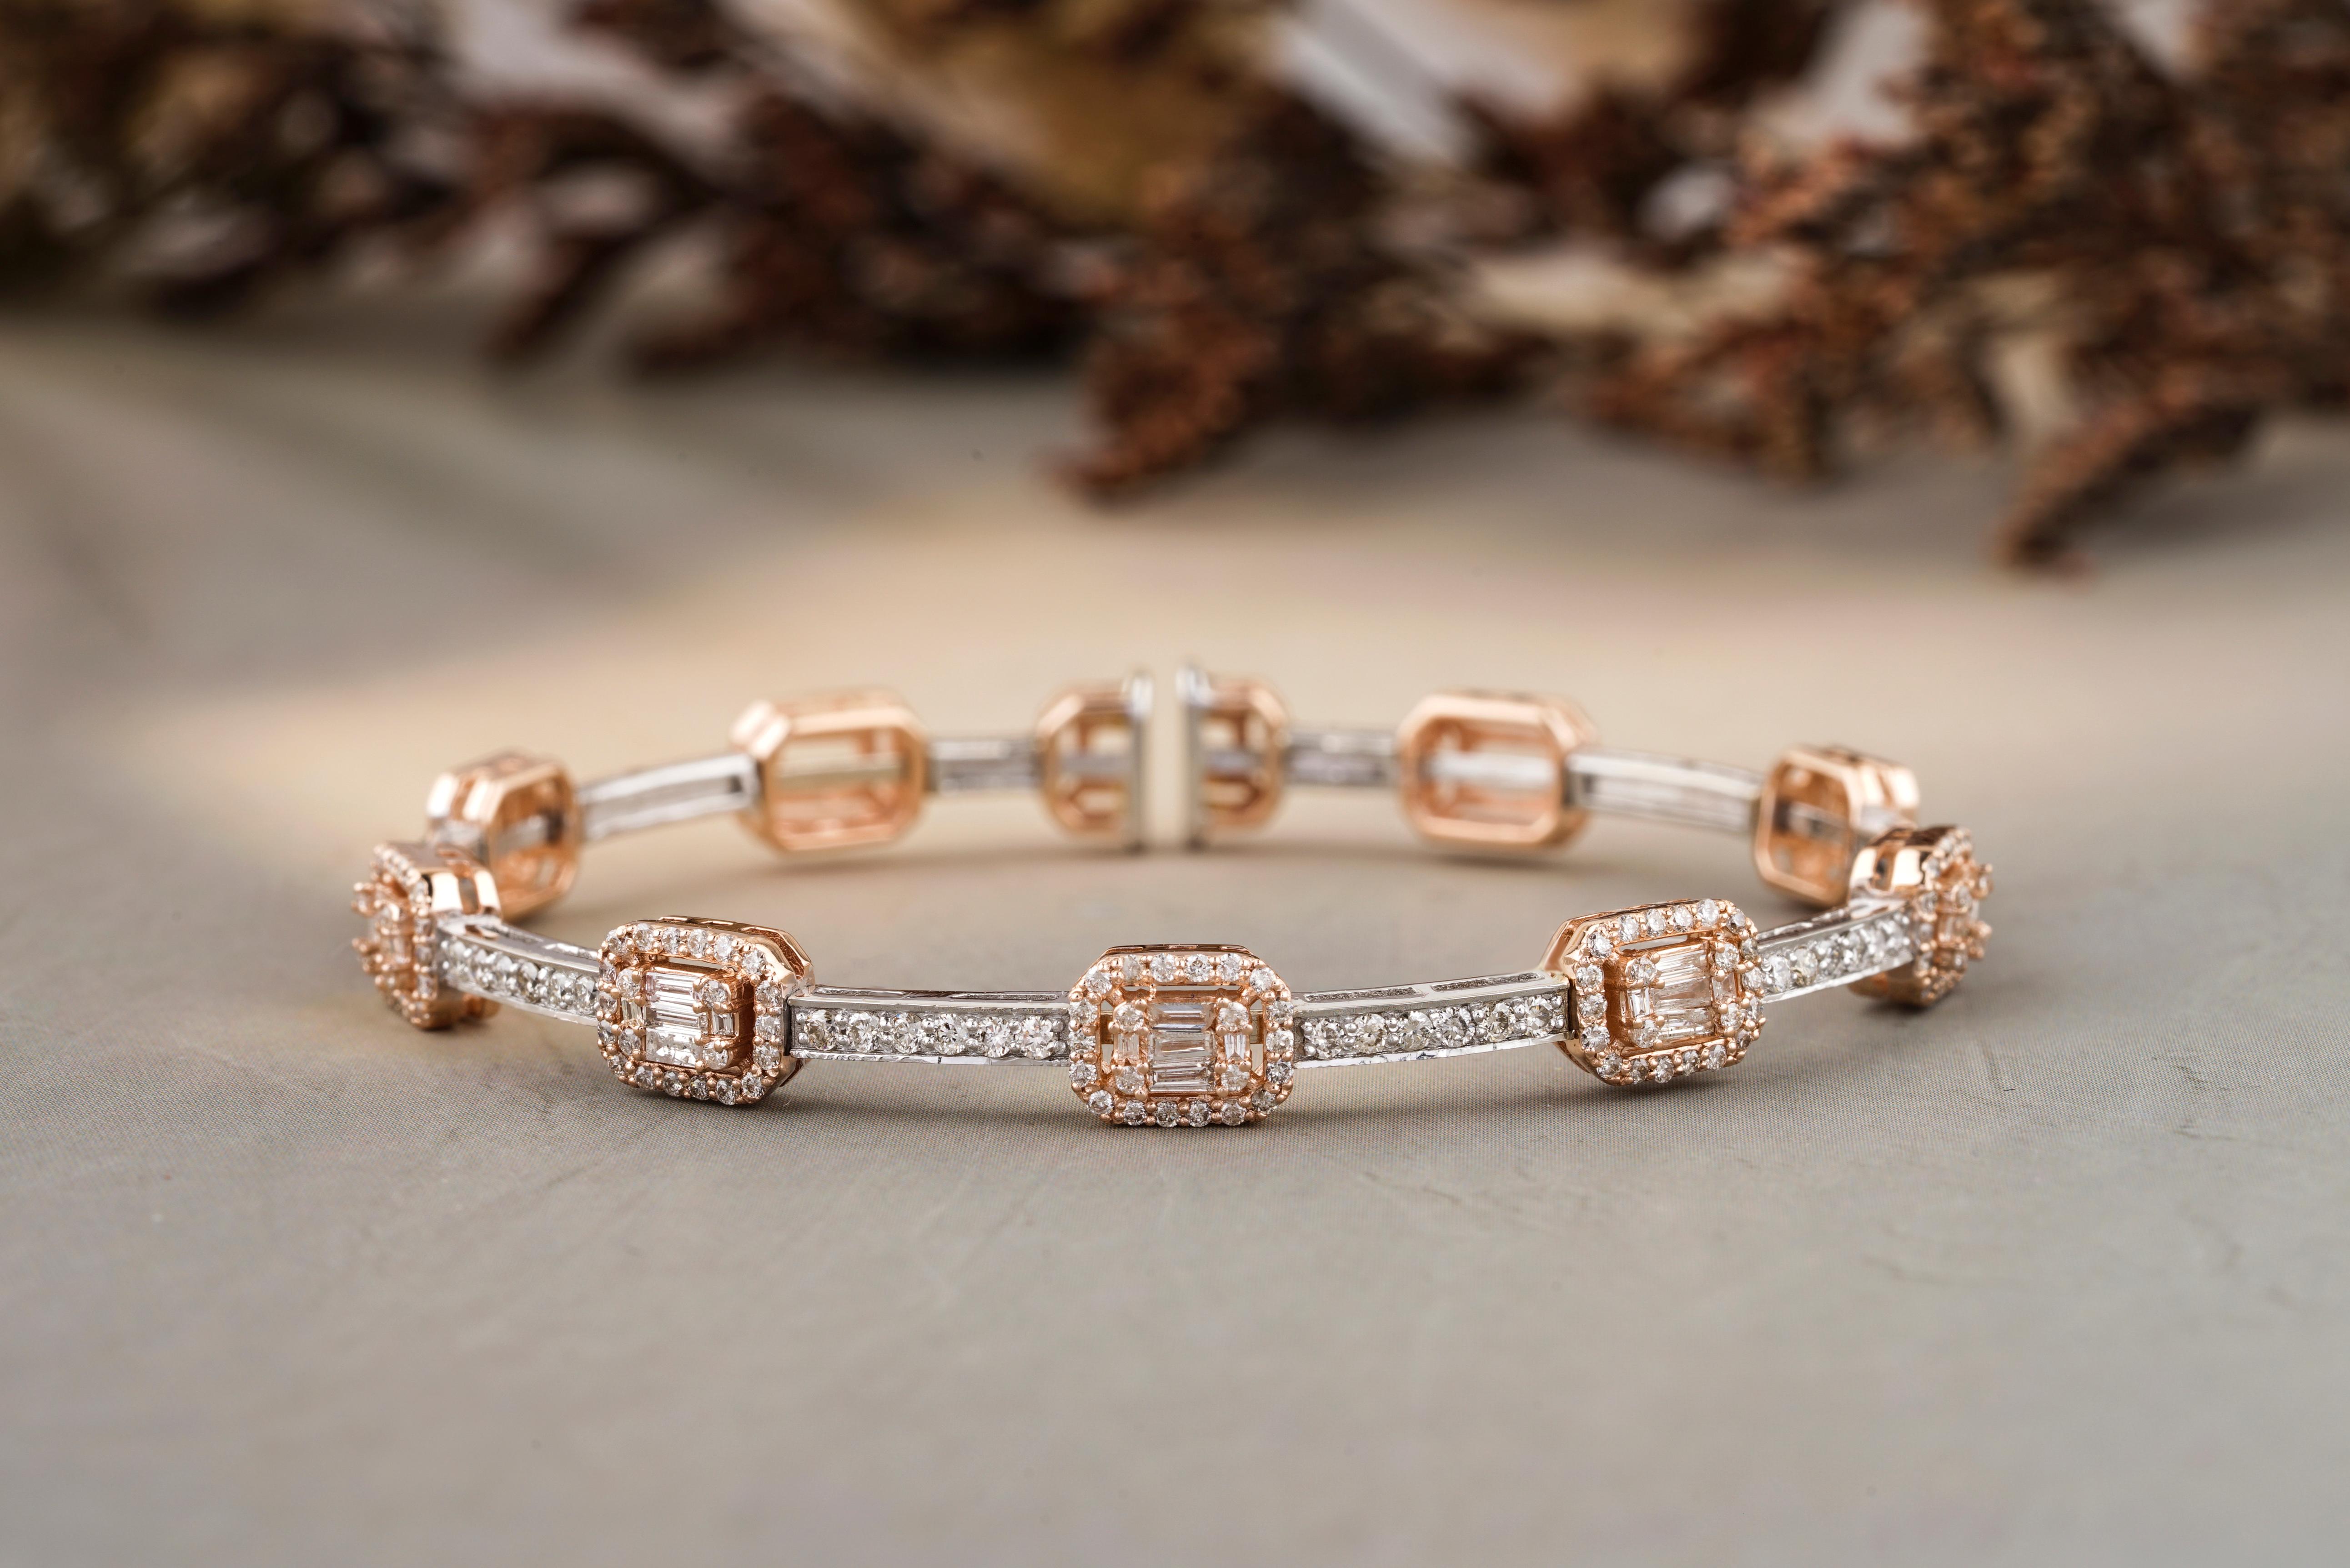 Round & Baguette Diamond With Illusion Setting Cuff Bracelet made of 18k solid gold, featuring a dual-tone design, combining white and rose gold elements. Its rectangular links are composed of rose gold sections that house both baguette and round